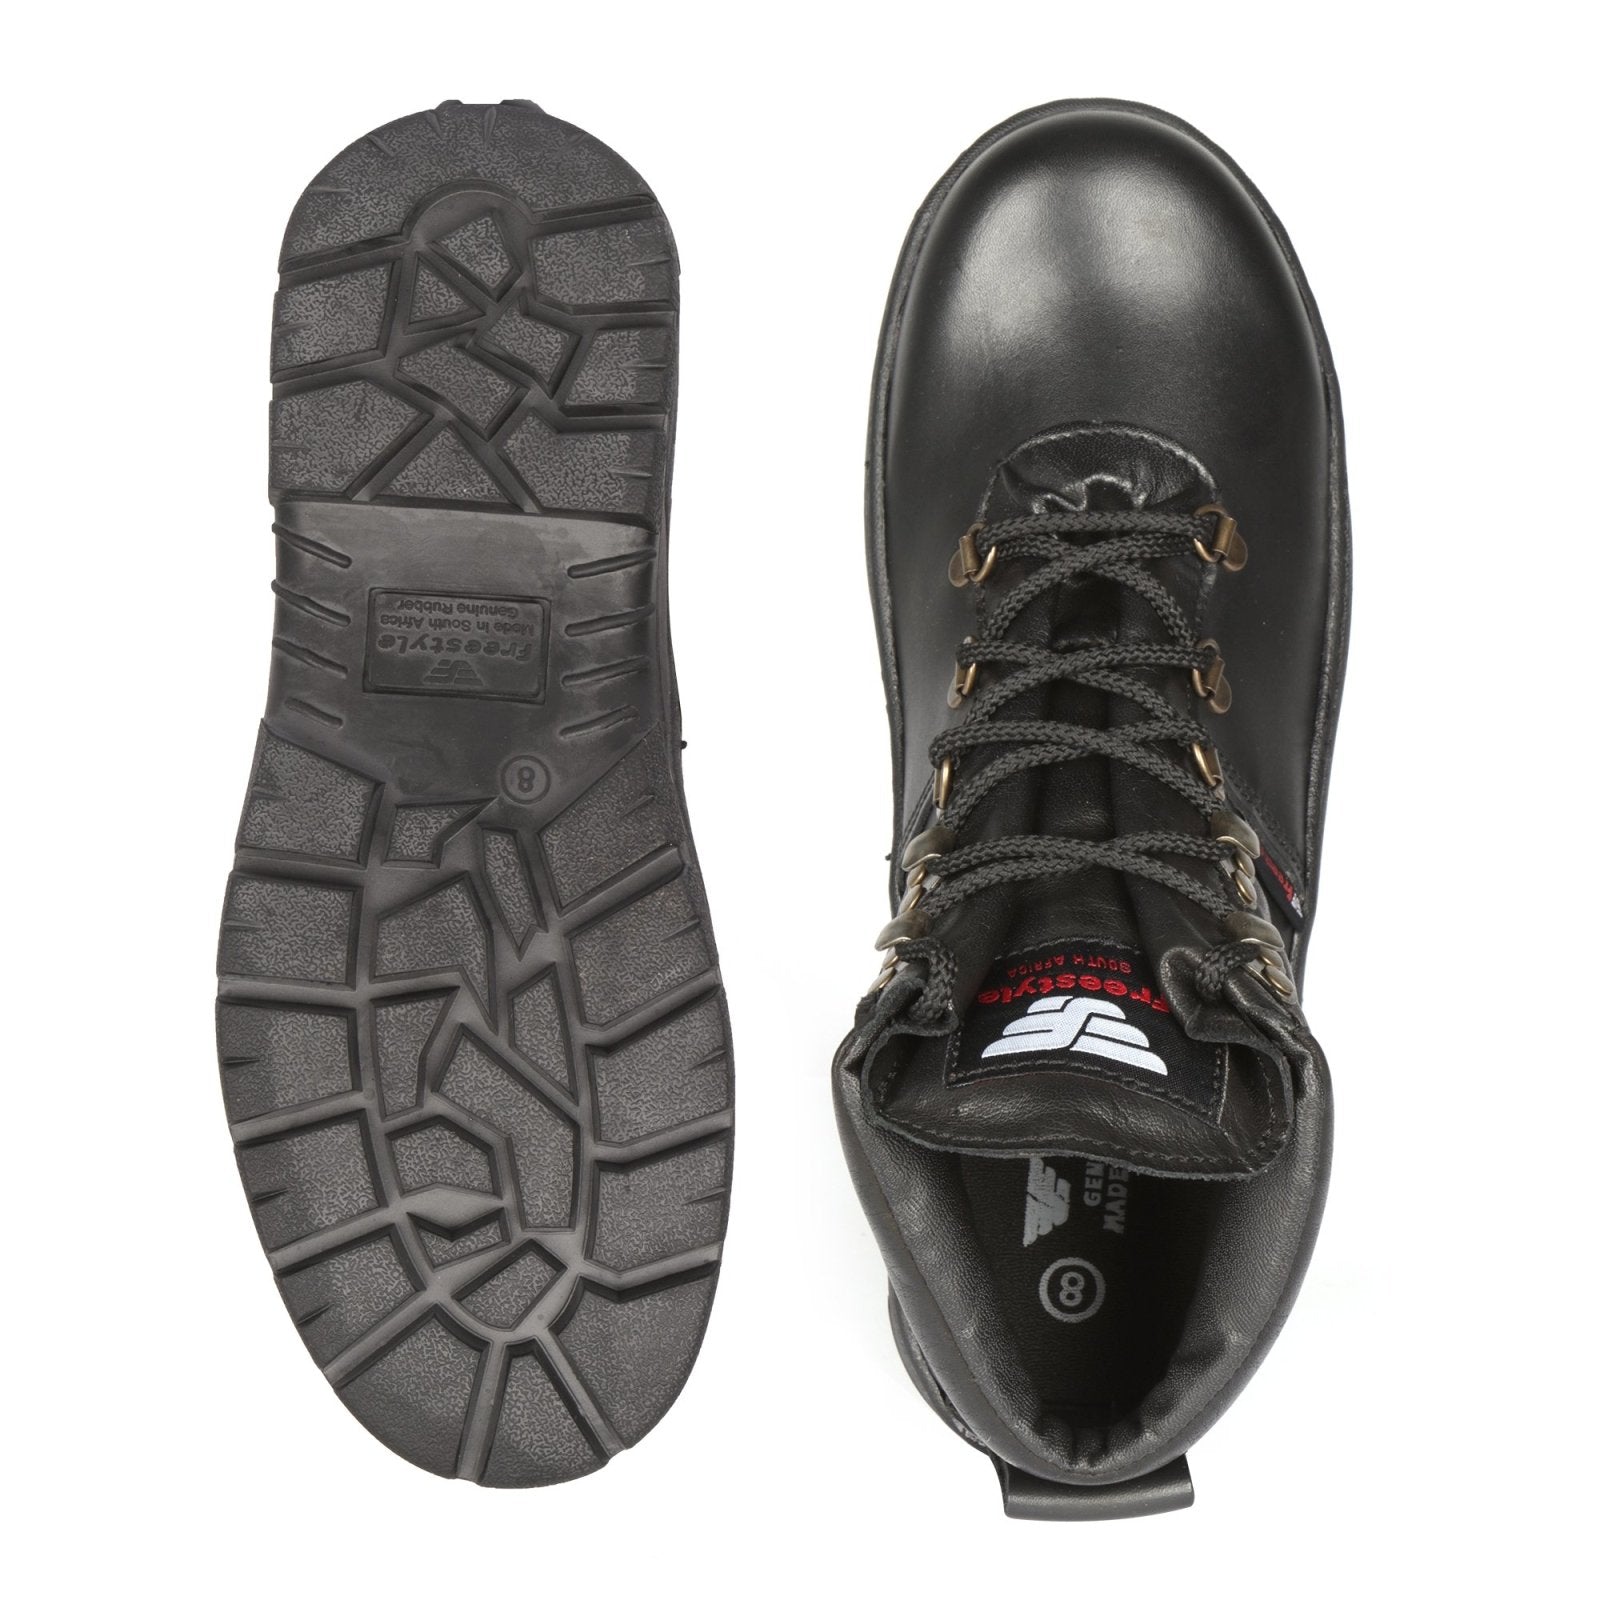 Tracker PRO Premium Full Grain Leather Boot - Freestyle SA Proudly local leather boots veldskoens vellies leather shoes suede veldskoens